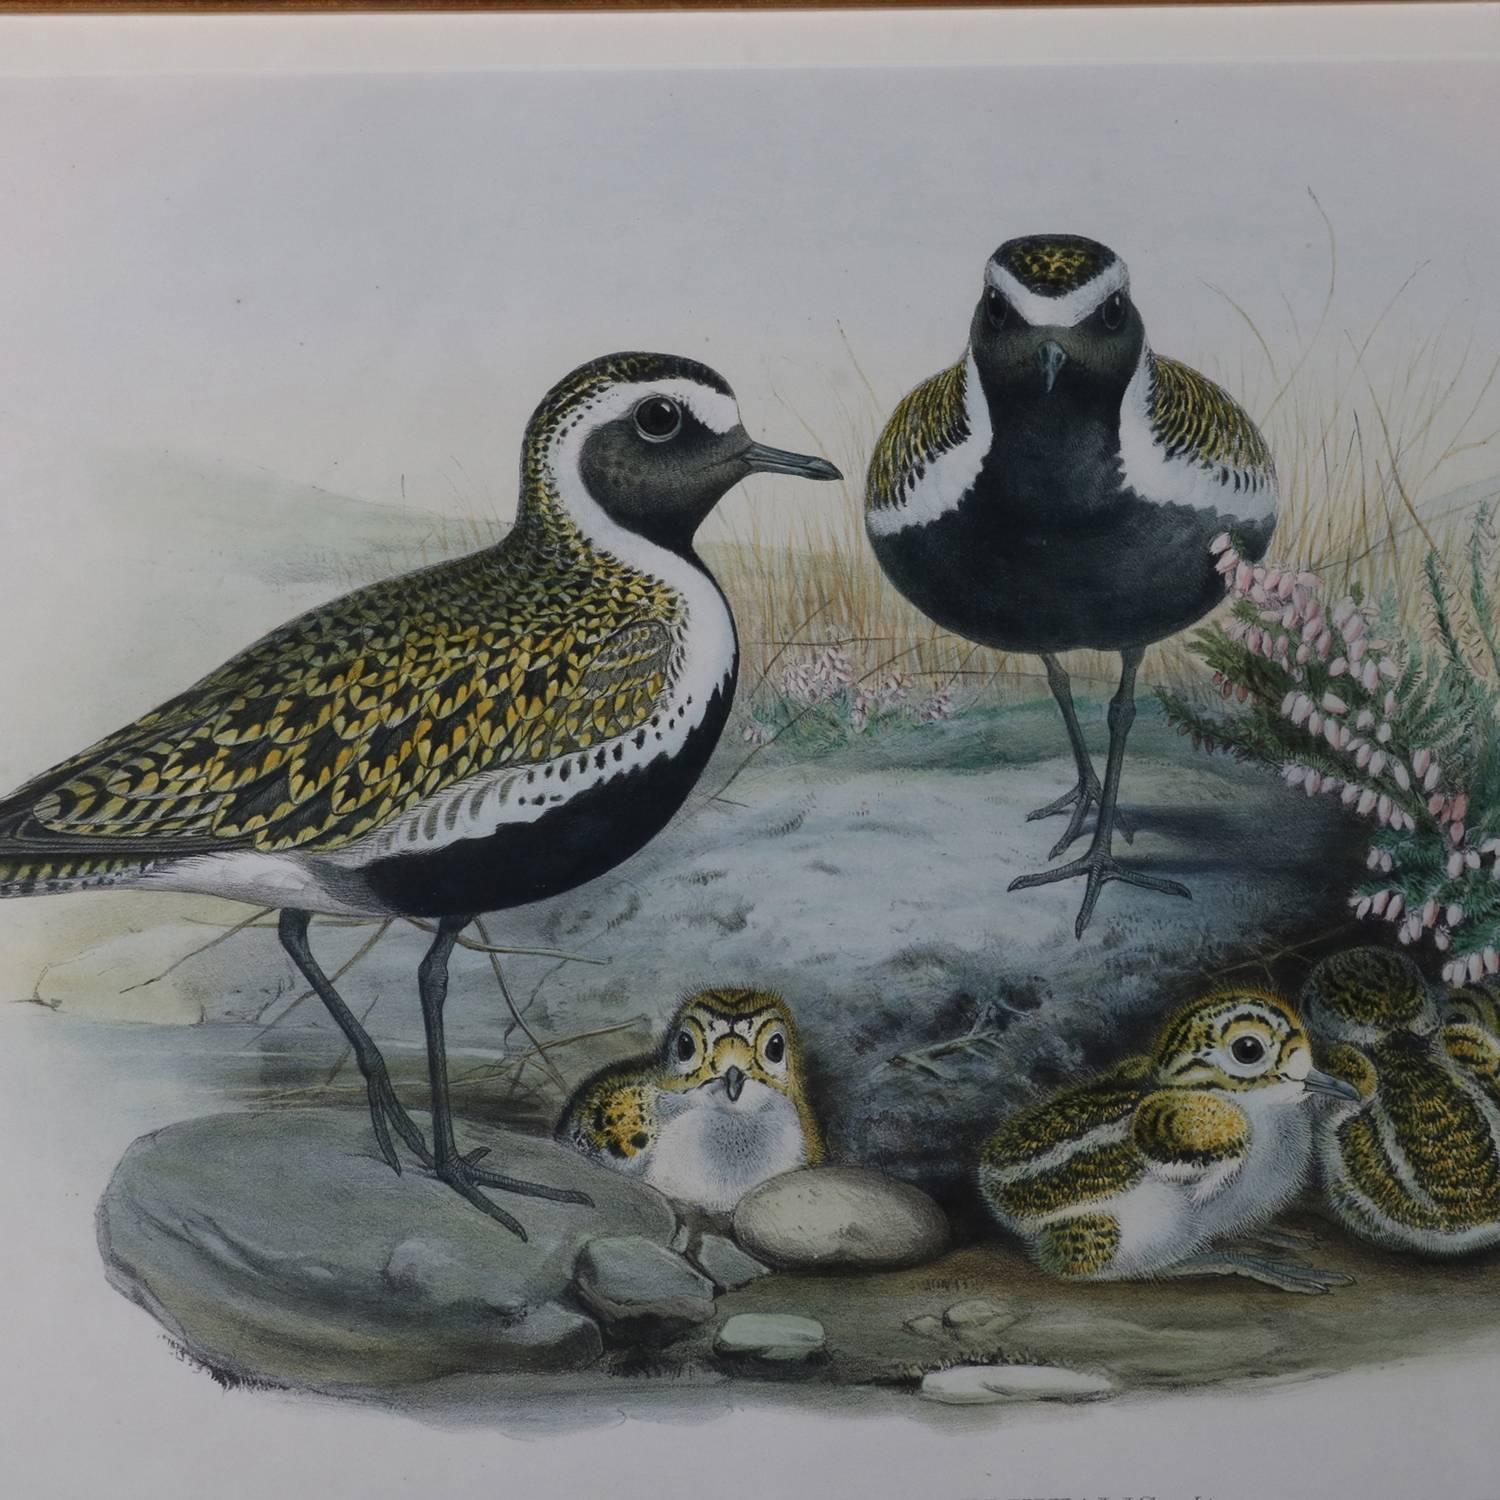 Vintage Audubon School hand coloured lithograph (bird print) " Charadrius Pluvialis, Linn" (Golden Plover) Summer Plumage, lithographed by J. Wolf and H.C. Richter after John Gould from "Birds of Great Britain" Volume 4; Plate